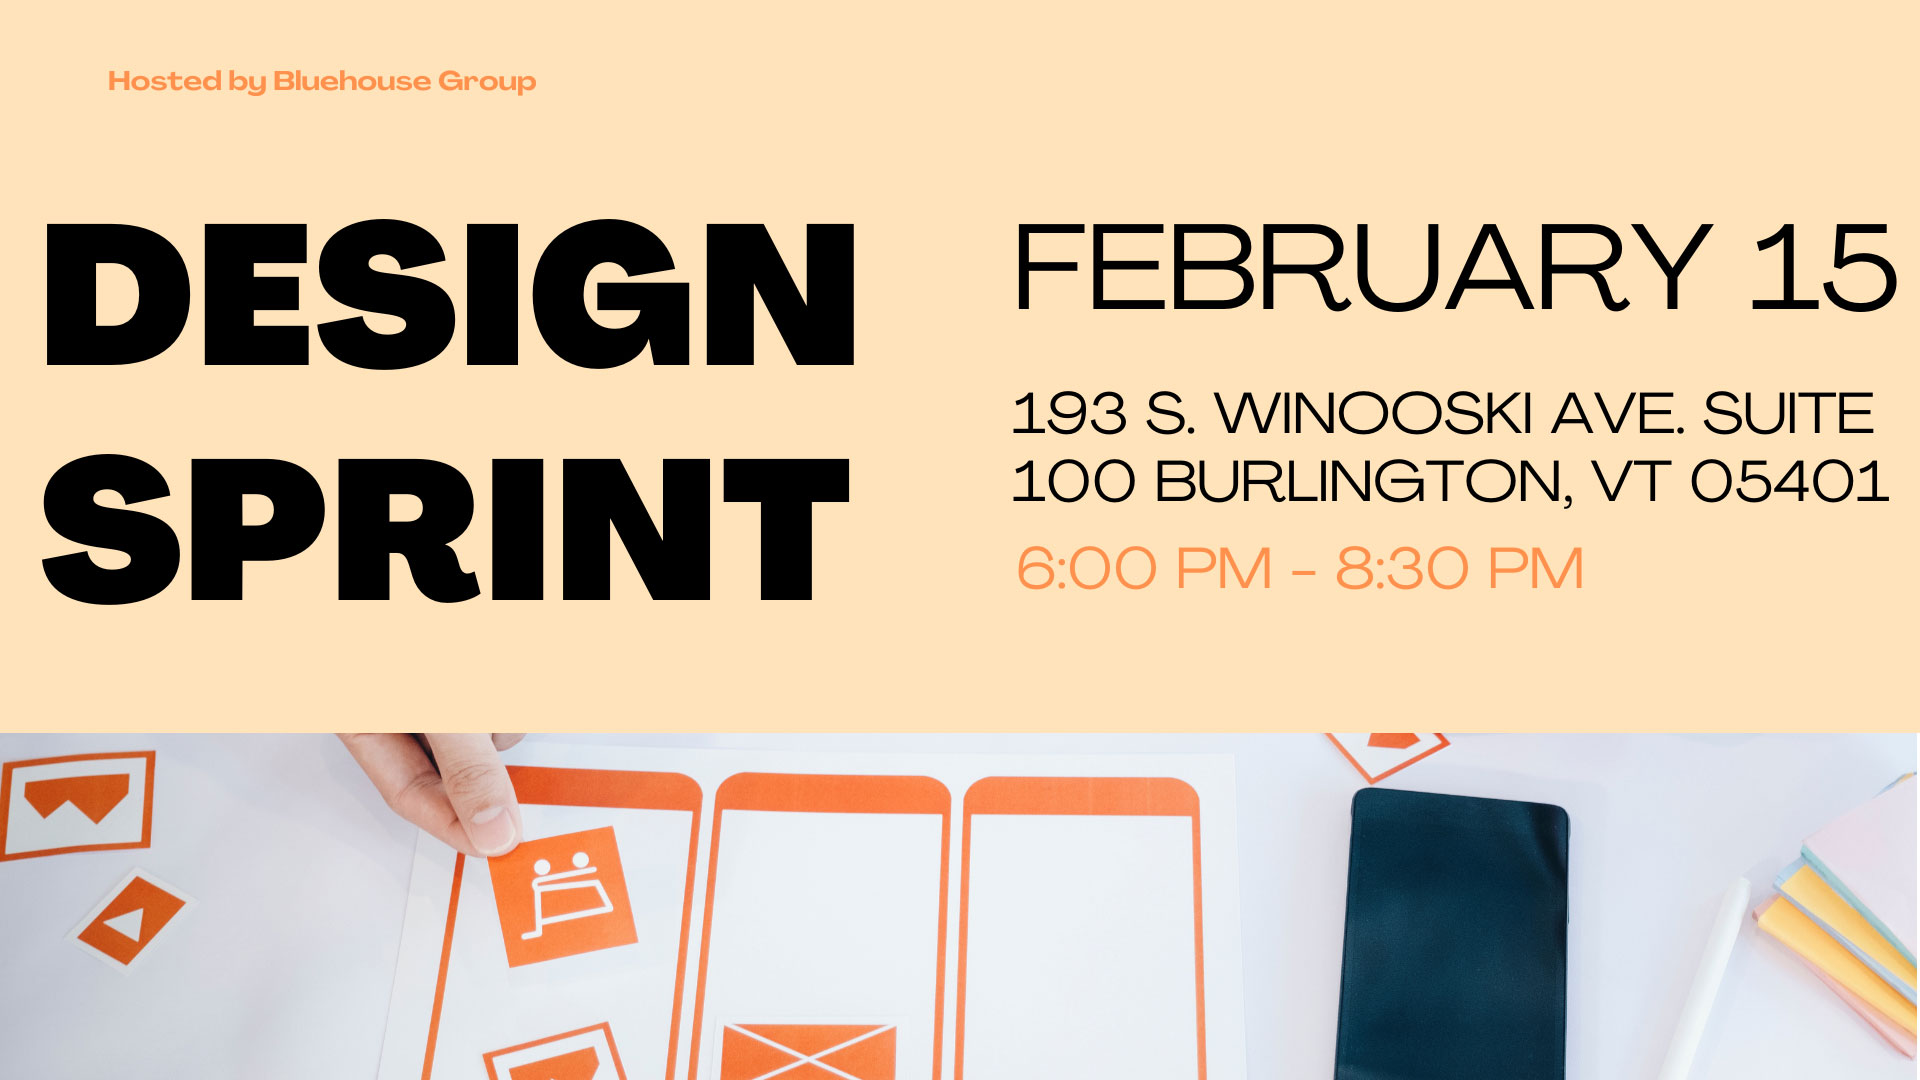 A cover image for an event. The left side of the image reads “DESIGN SPRINT” in large bold text with “Hosted by Bluehouse Group” above it. On the right side of the image reads “February 11th” with Bluehouse Group’s address underneath “193. South Winooski Ave. Suite 100 Burlington, VT 05401” with the time 6:00 PM - 8 PM.